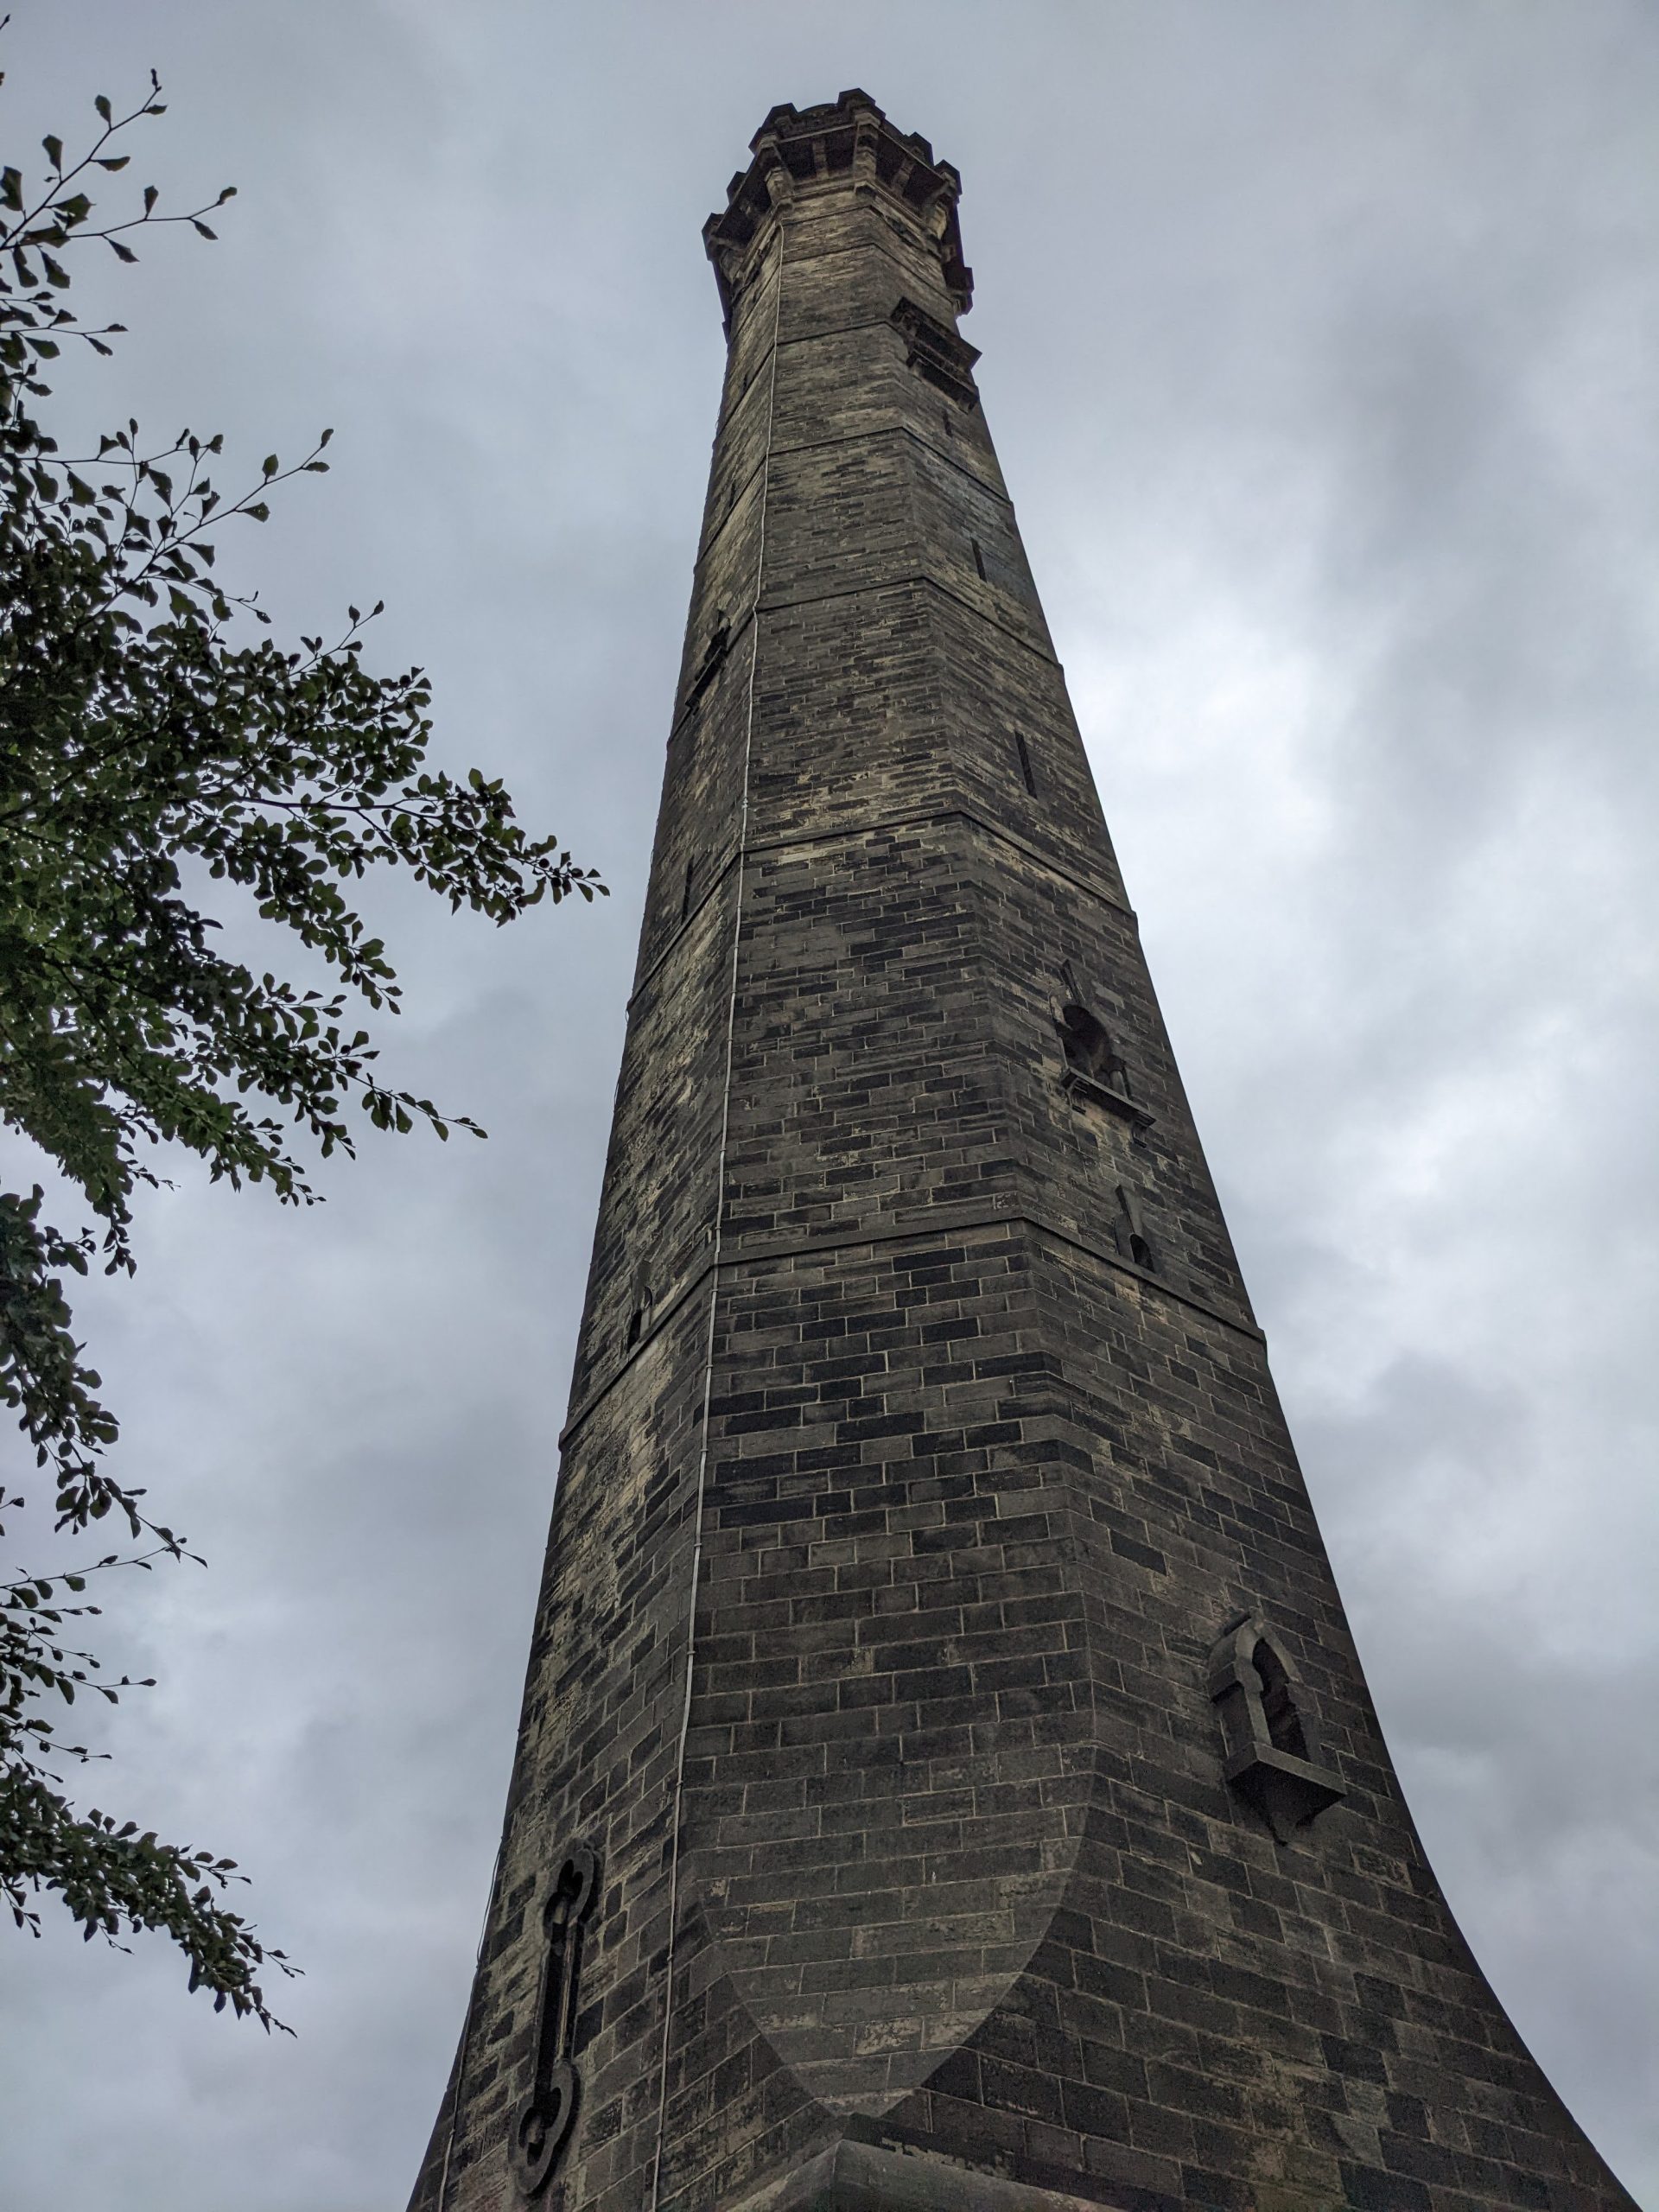 Wainhouse Tower from the bottom